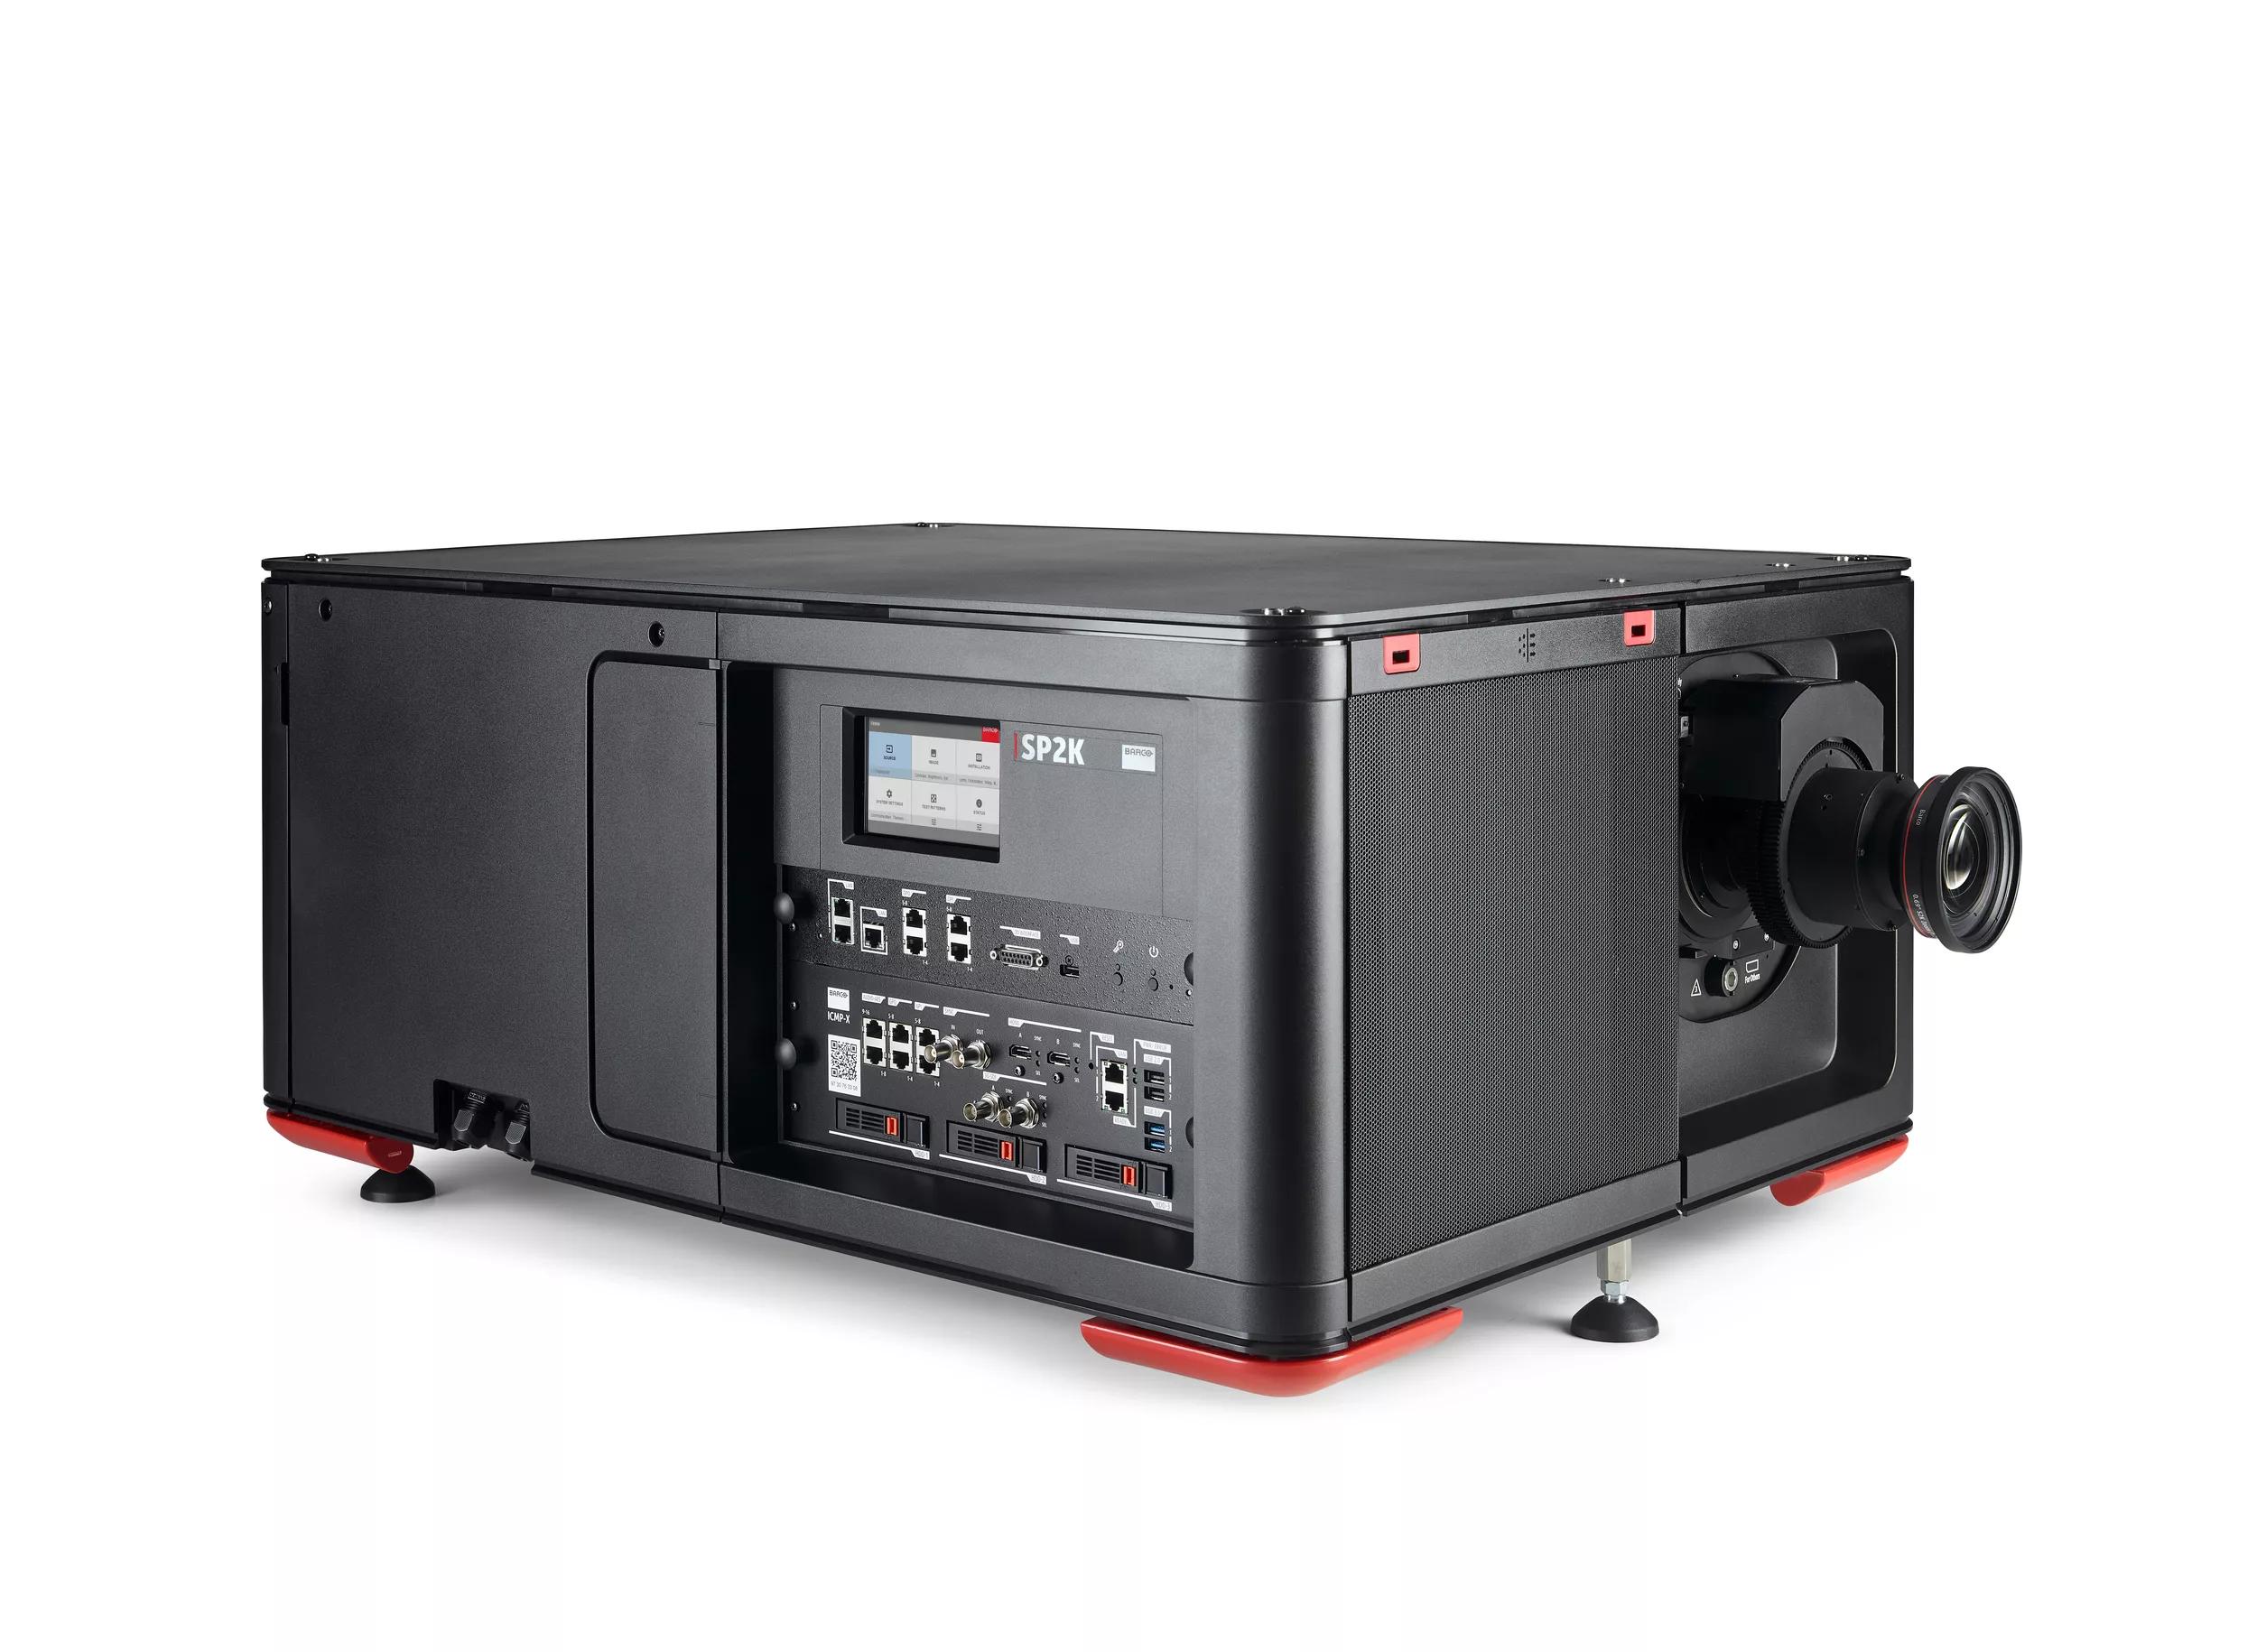 DP2K-32B - Product support - Barco